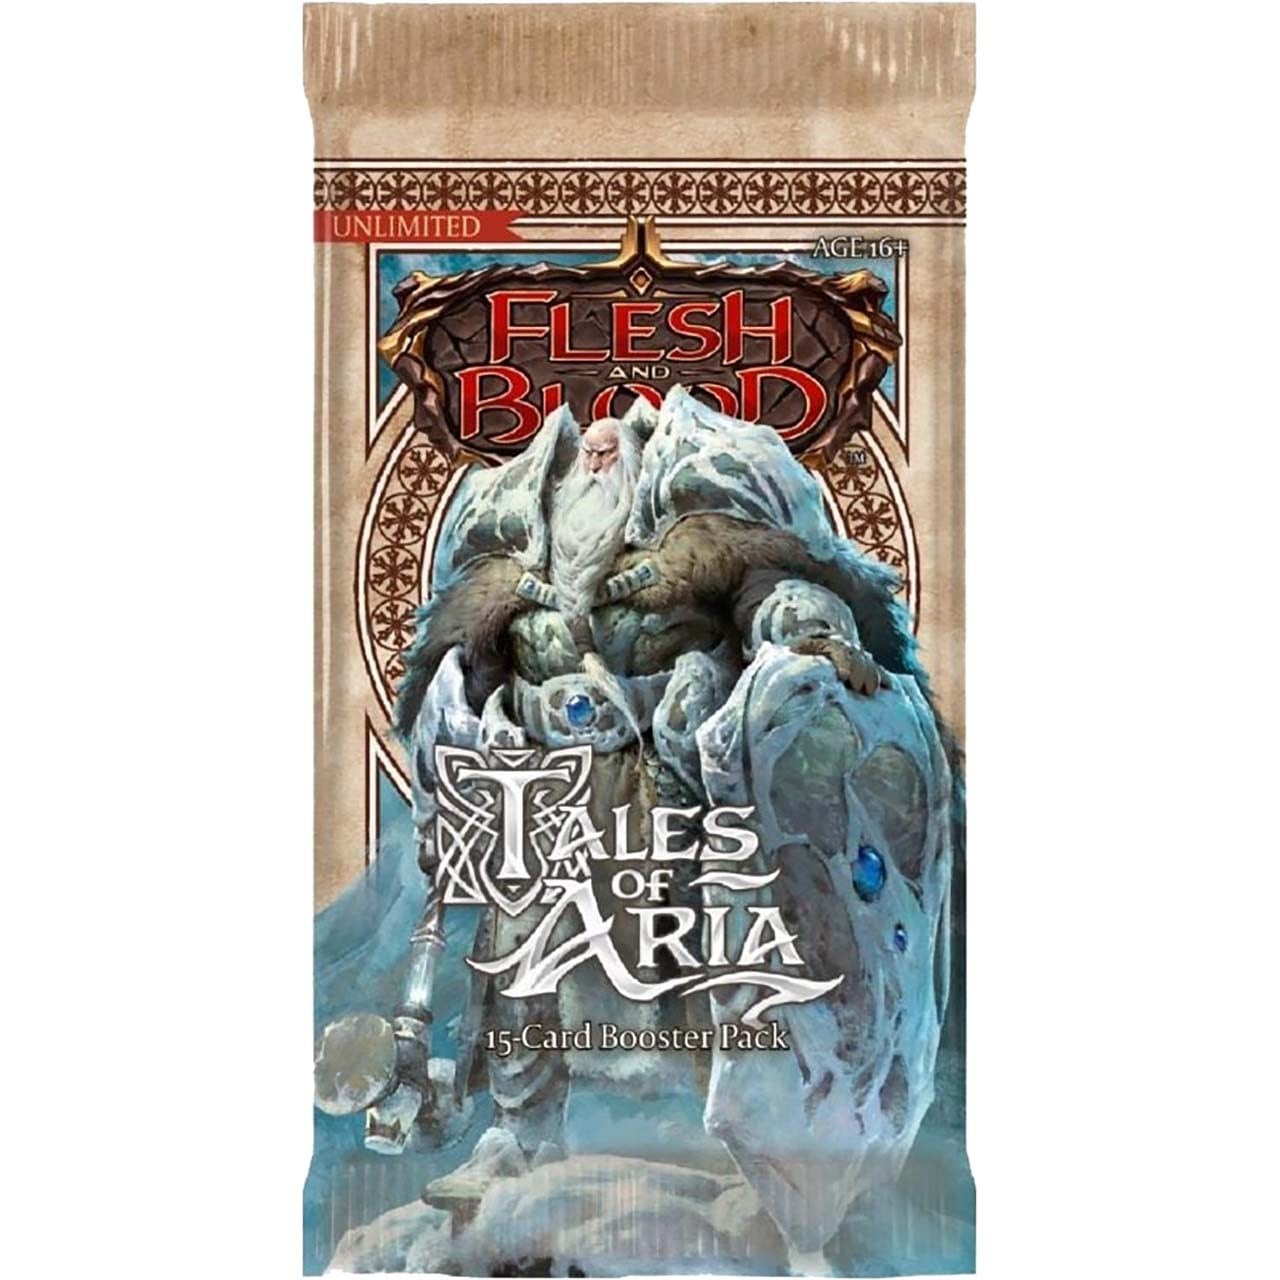 【FaB TCG】 Tales of Aria Unlimited Edition - ブースターPack(1パック) 《英語版》